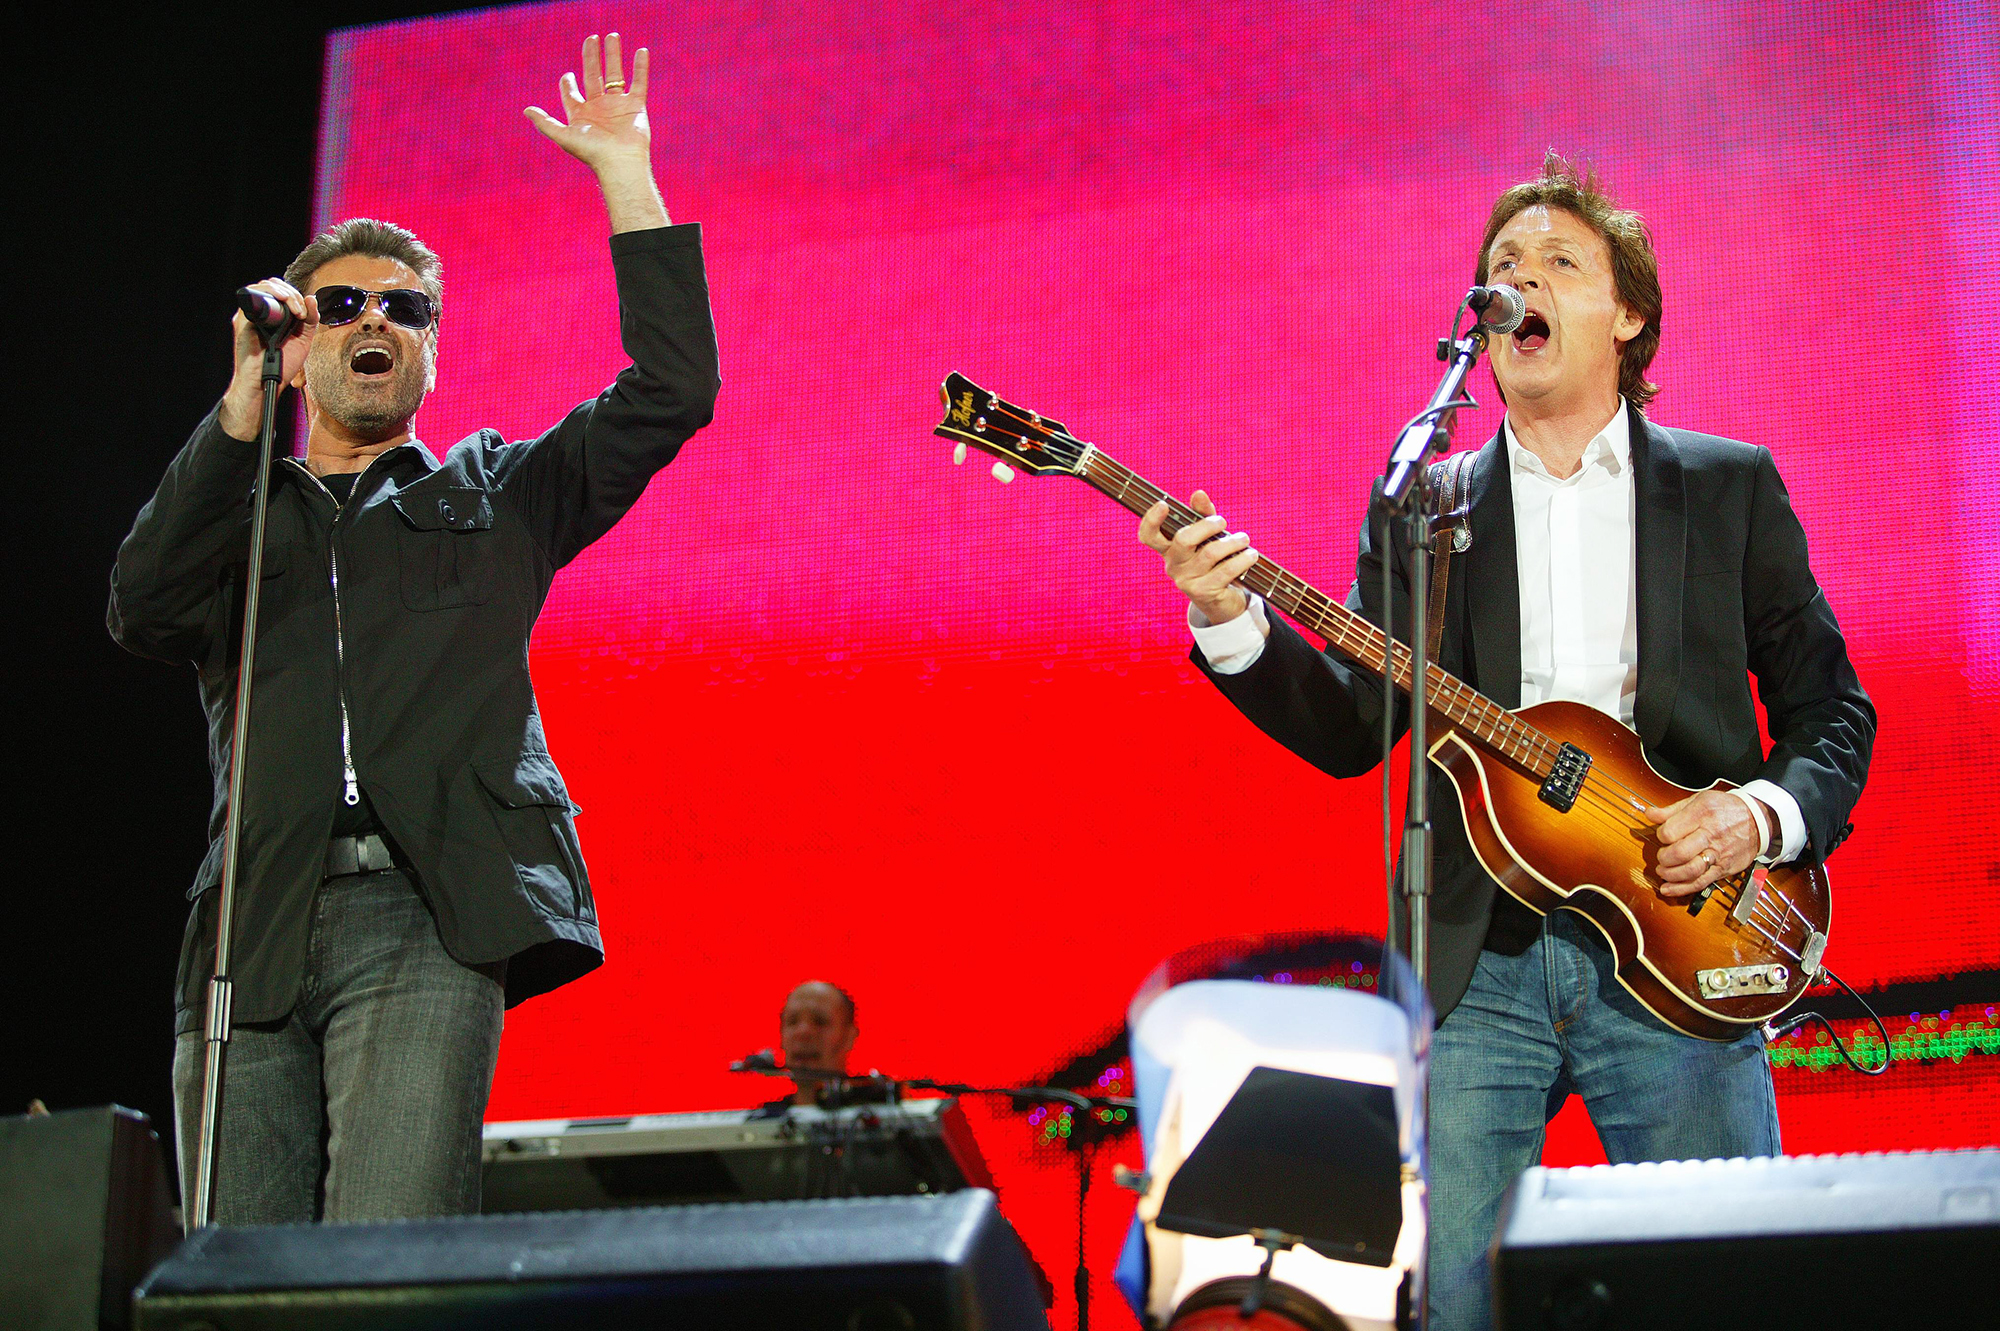 George Michael and Paul McCartney perform at Live 8 in London, on July 2, 2005.